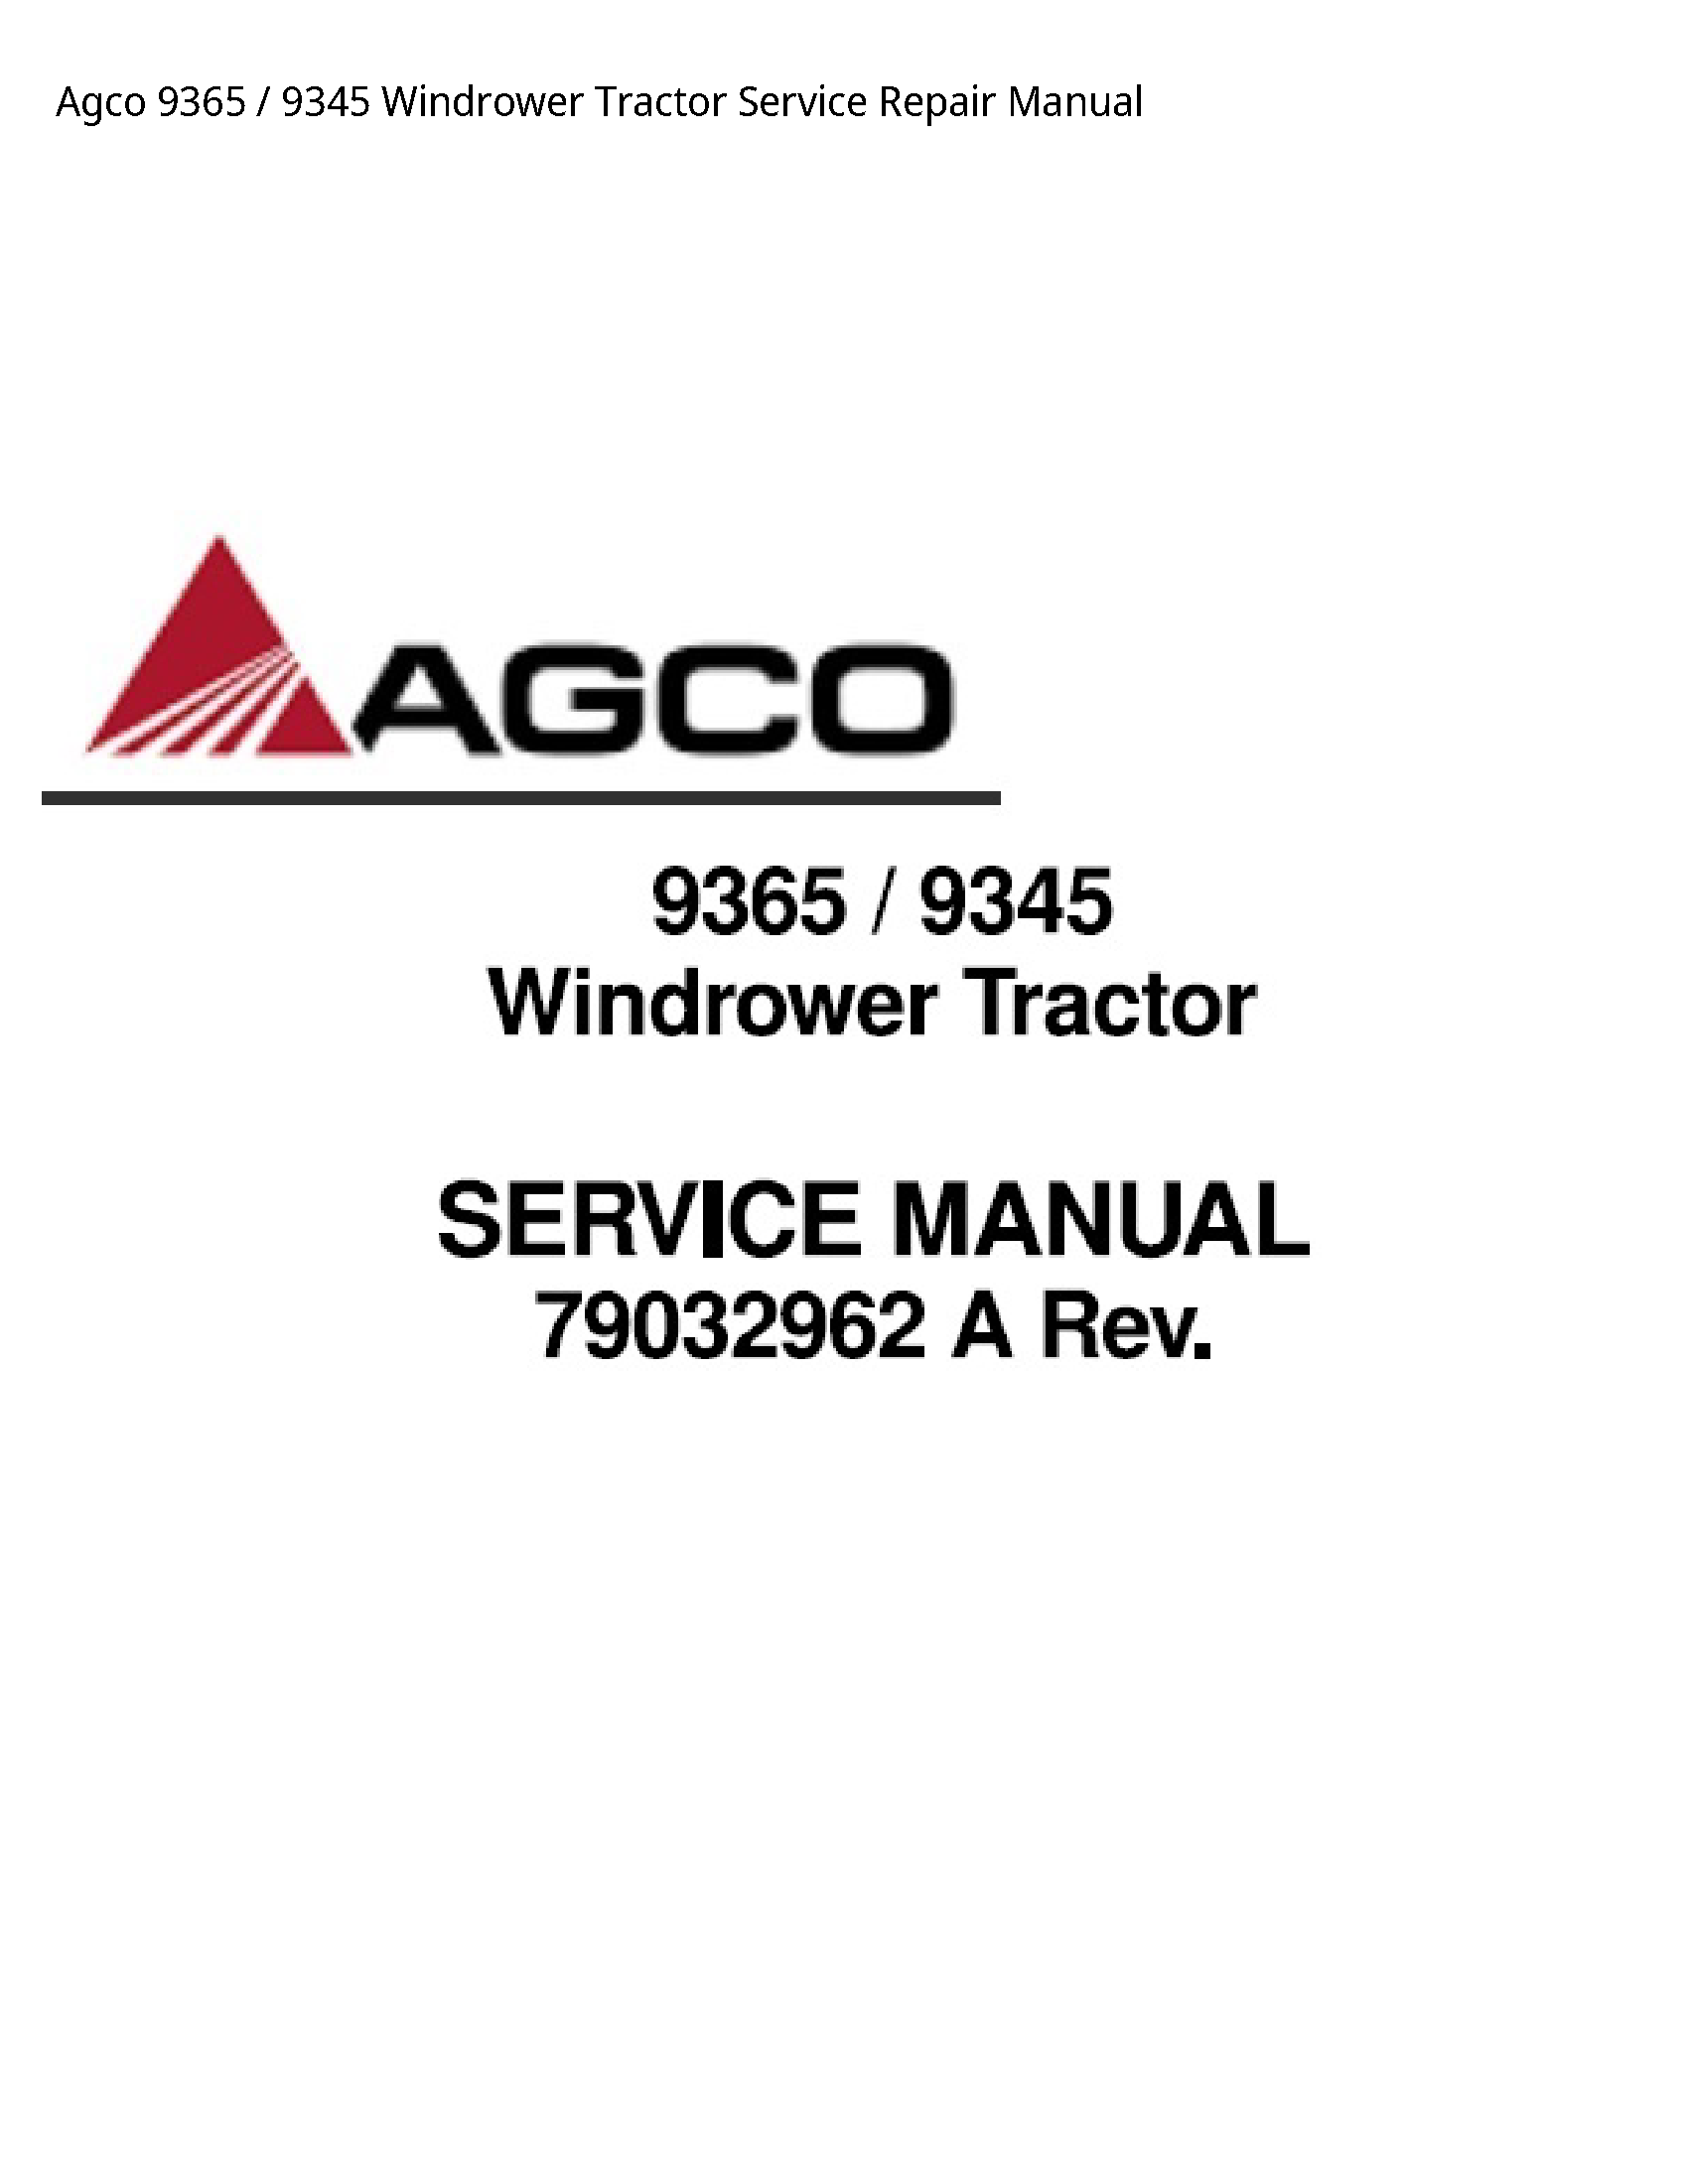 AGCO 9365 Windrower Tractor manual